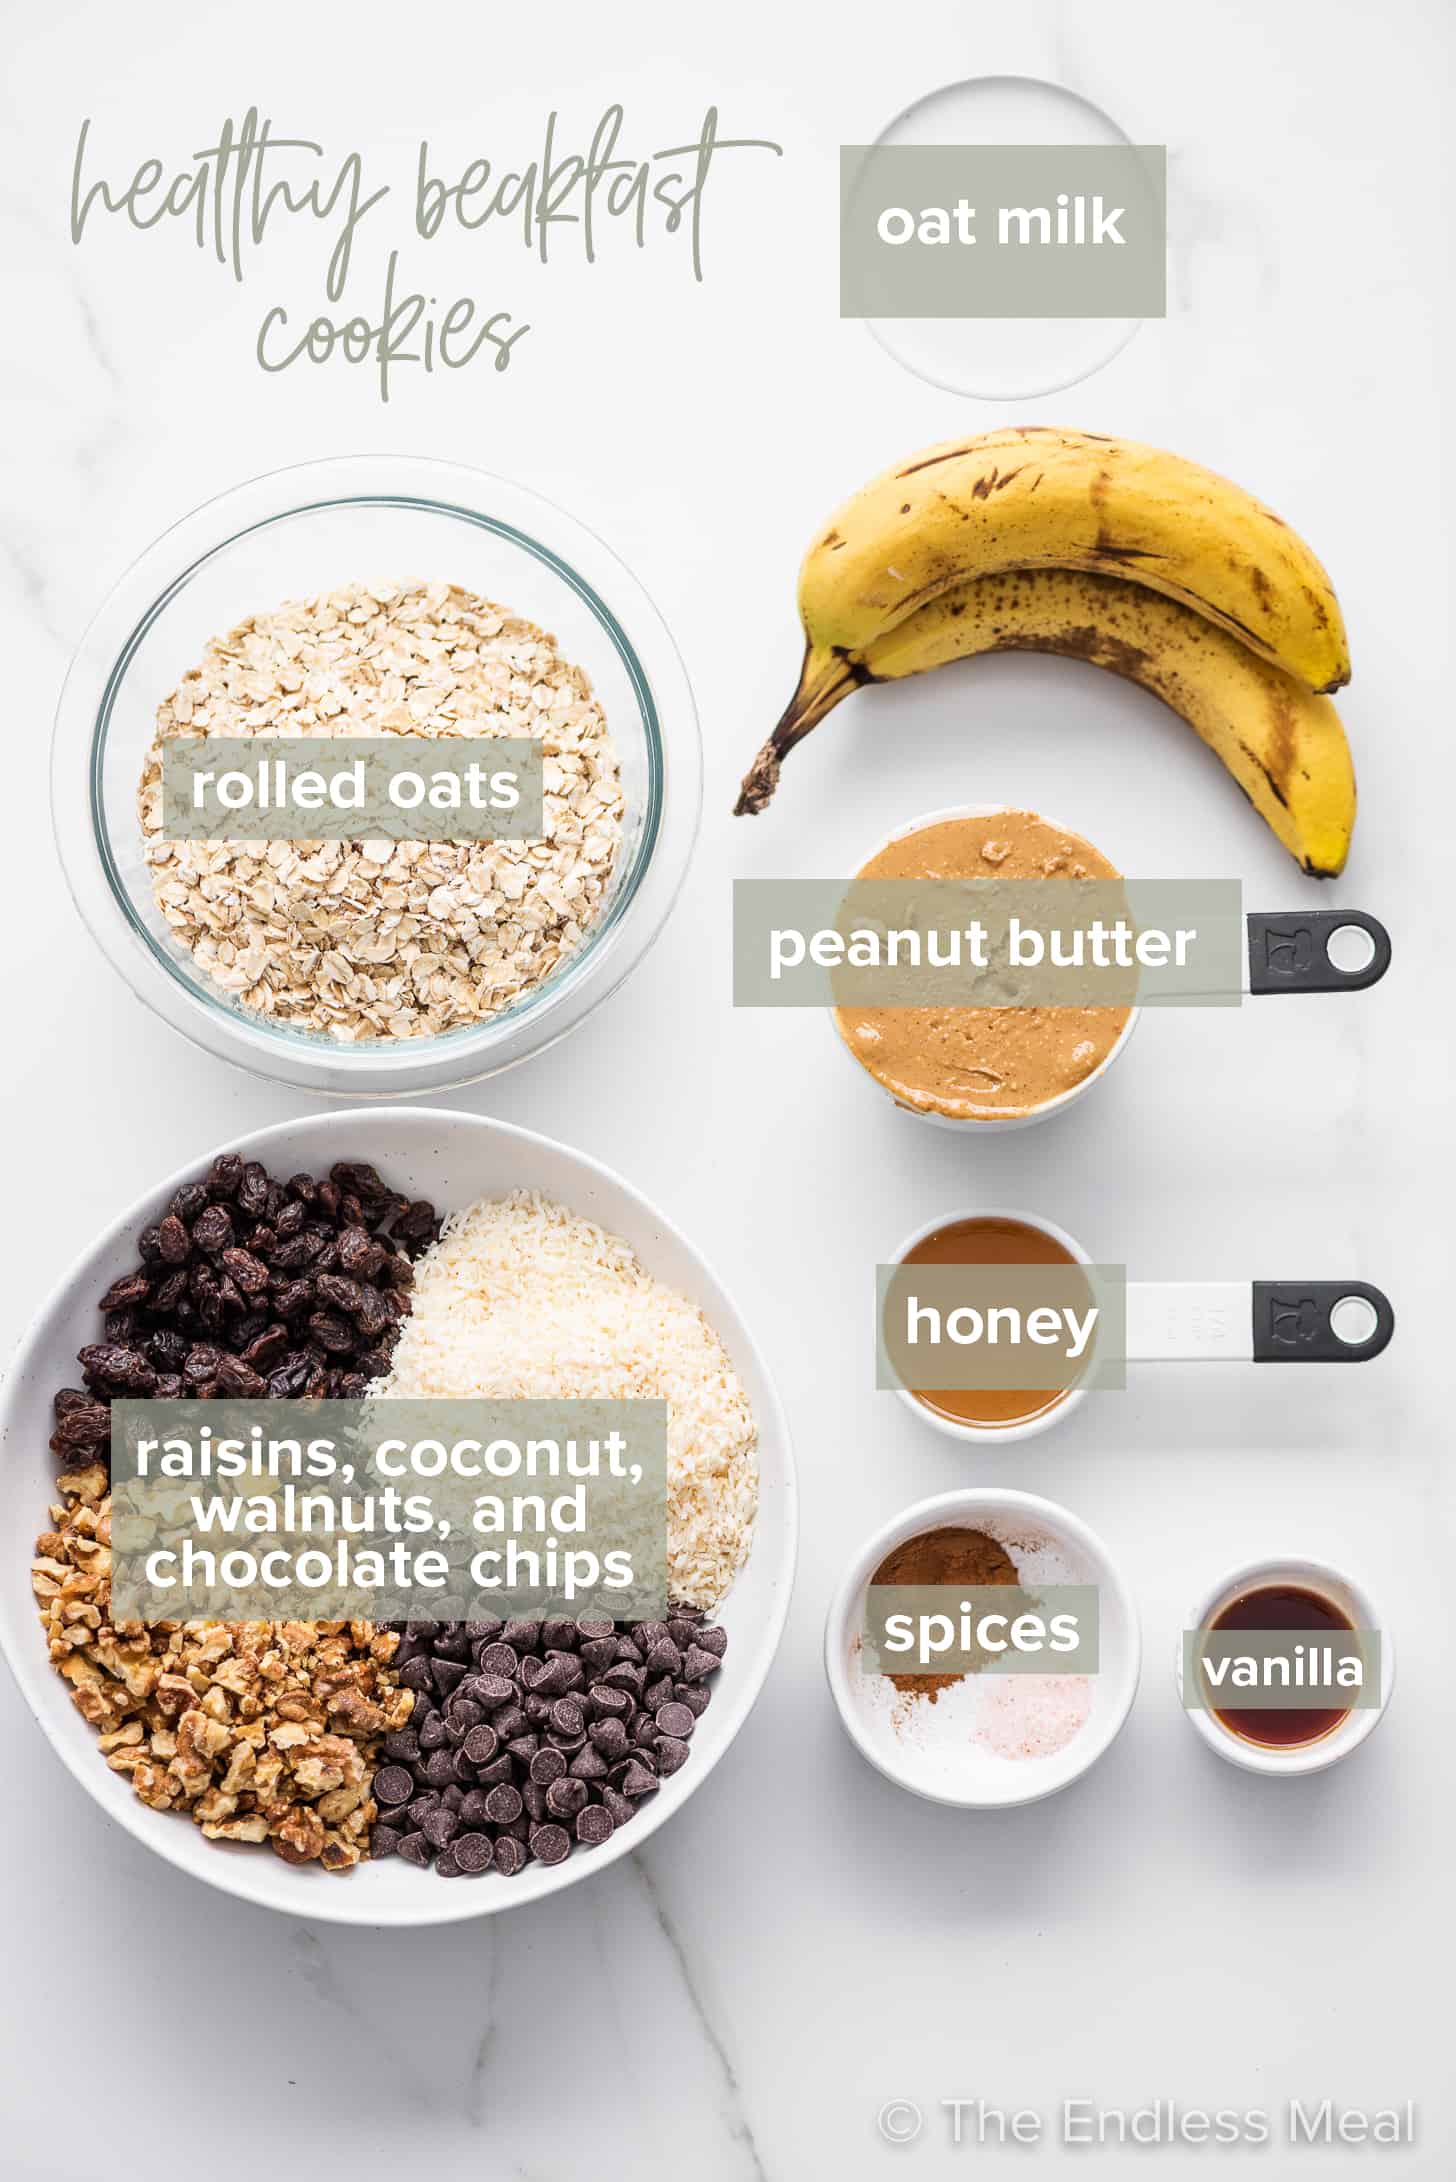 the ingredients to make healthy breakfast cookies on a marble countertop